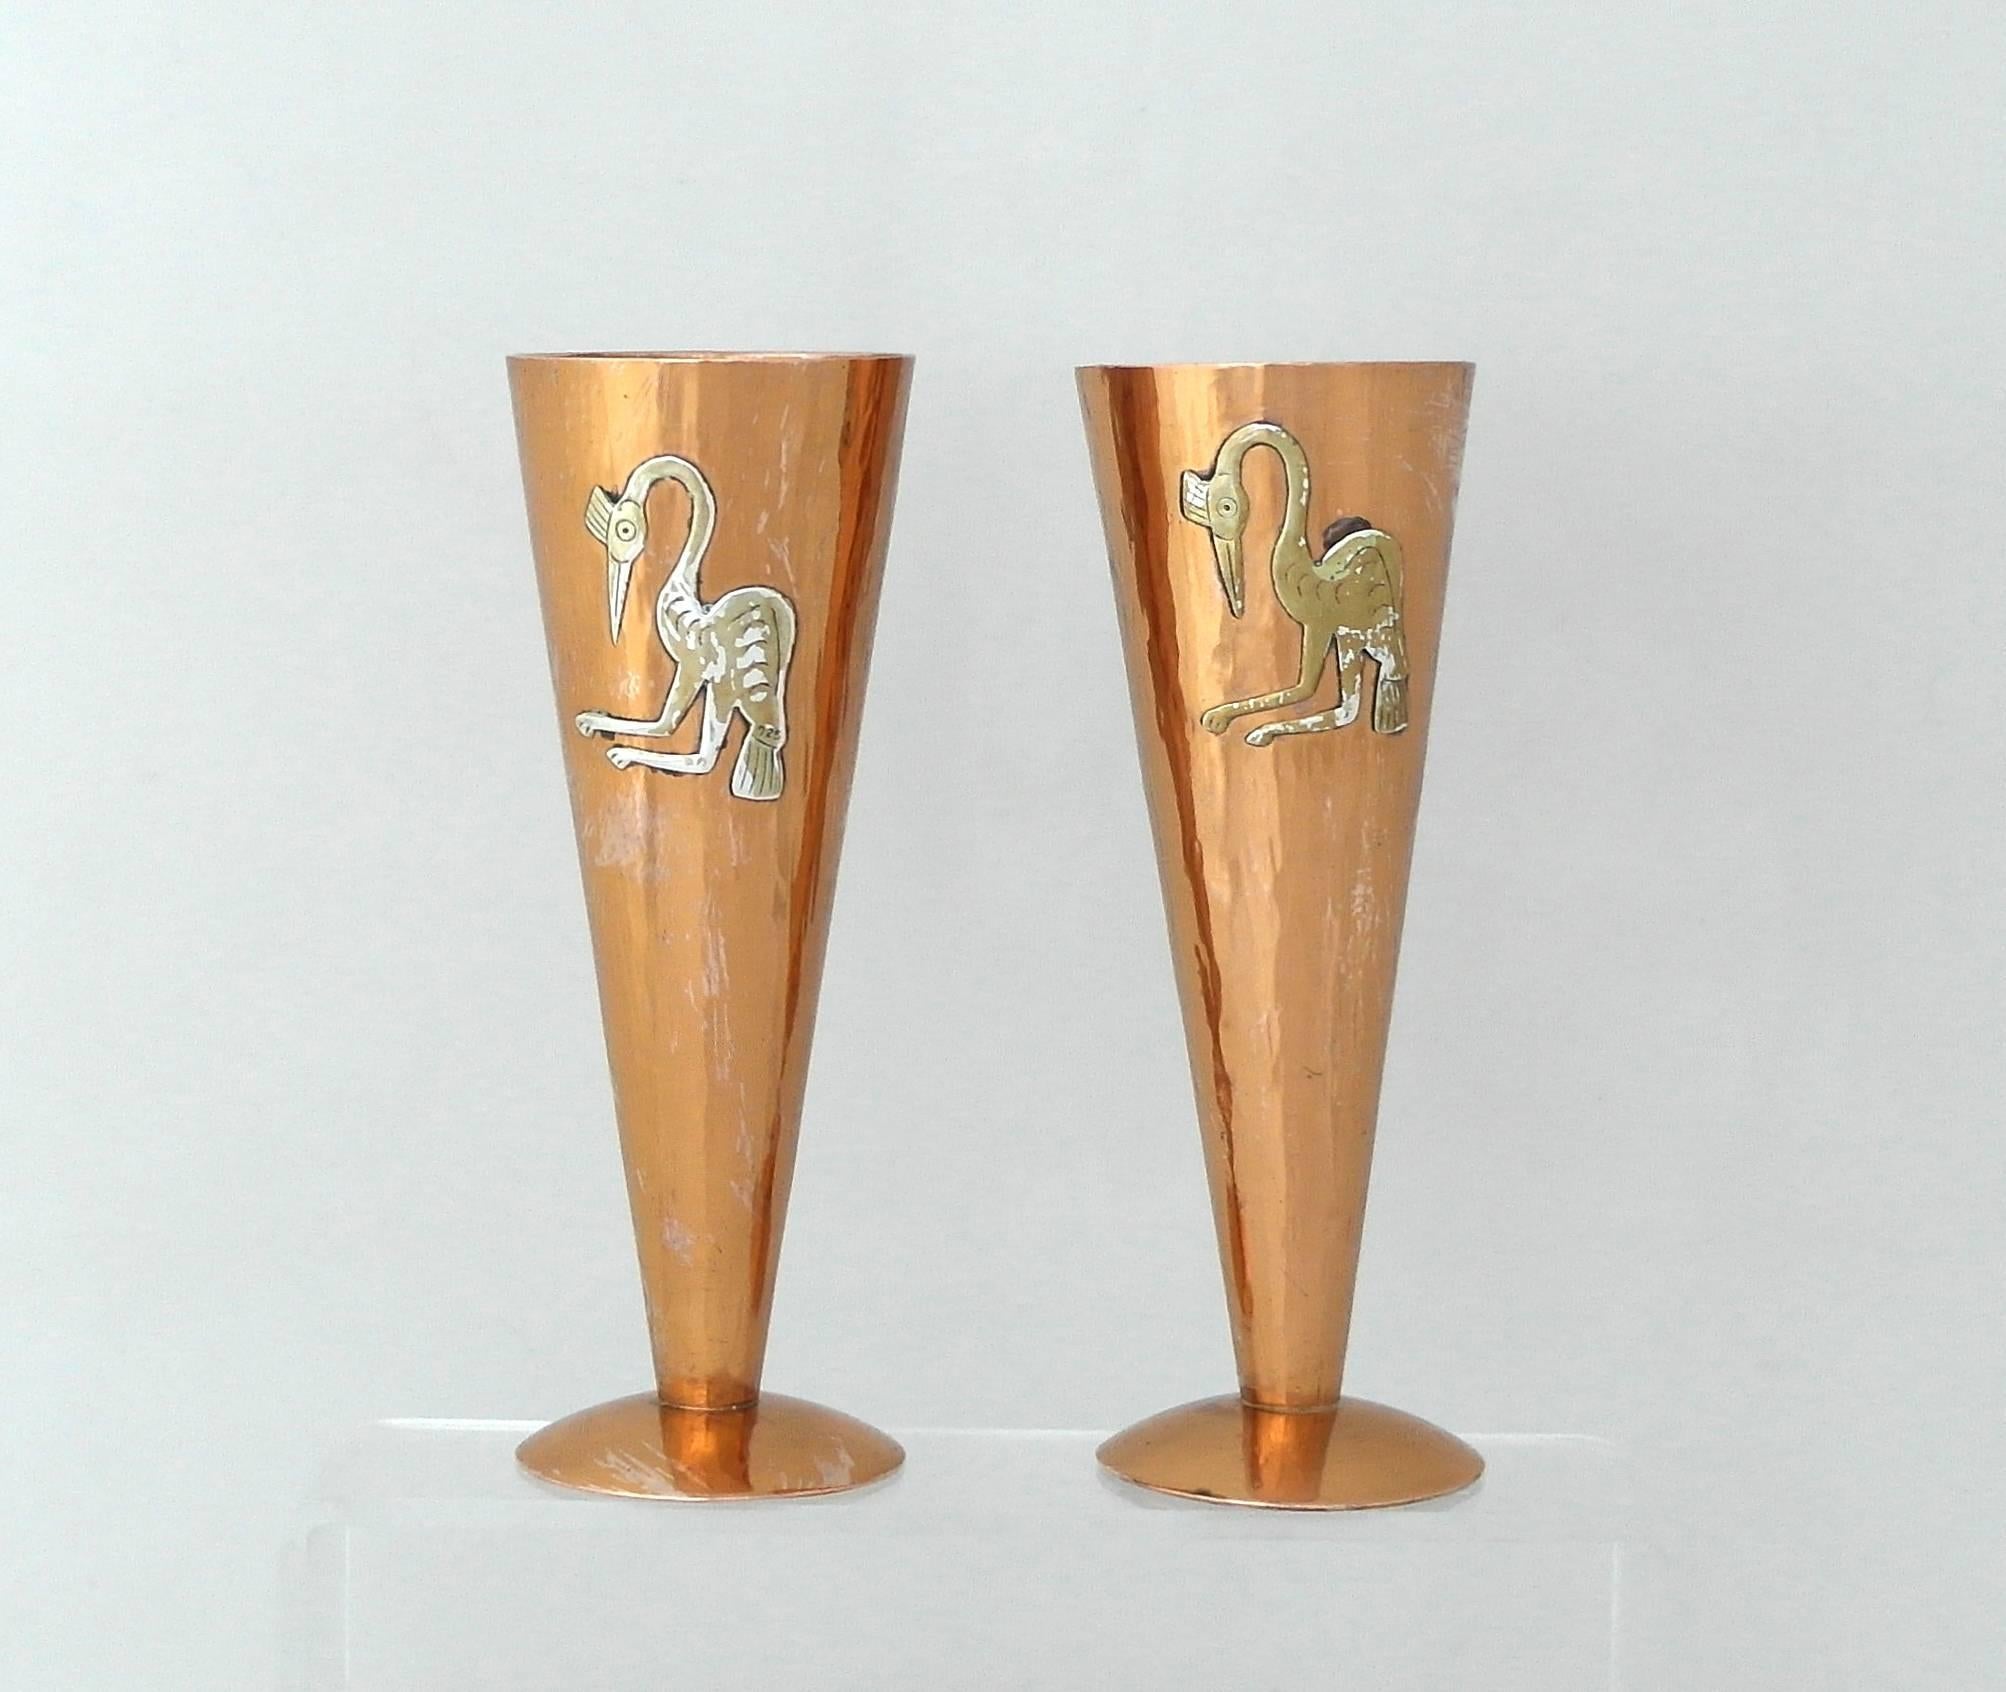 Being offered are a charming pair of circa 1975 copper and sterling silver vases by Vicky of Peru. Handmade and hammered pair with applied sterling silver exotic birds on opposite ends of each vase. Dimensions: 6 1/2 inches high x 2 1/4 inches